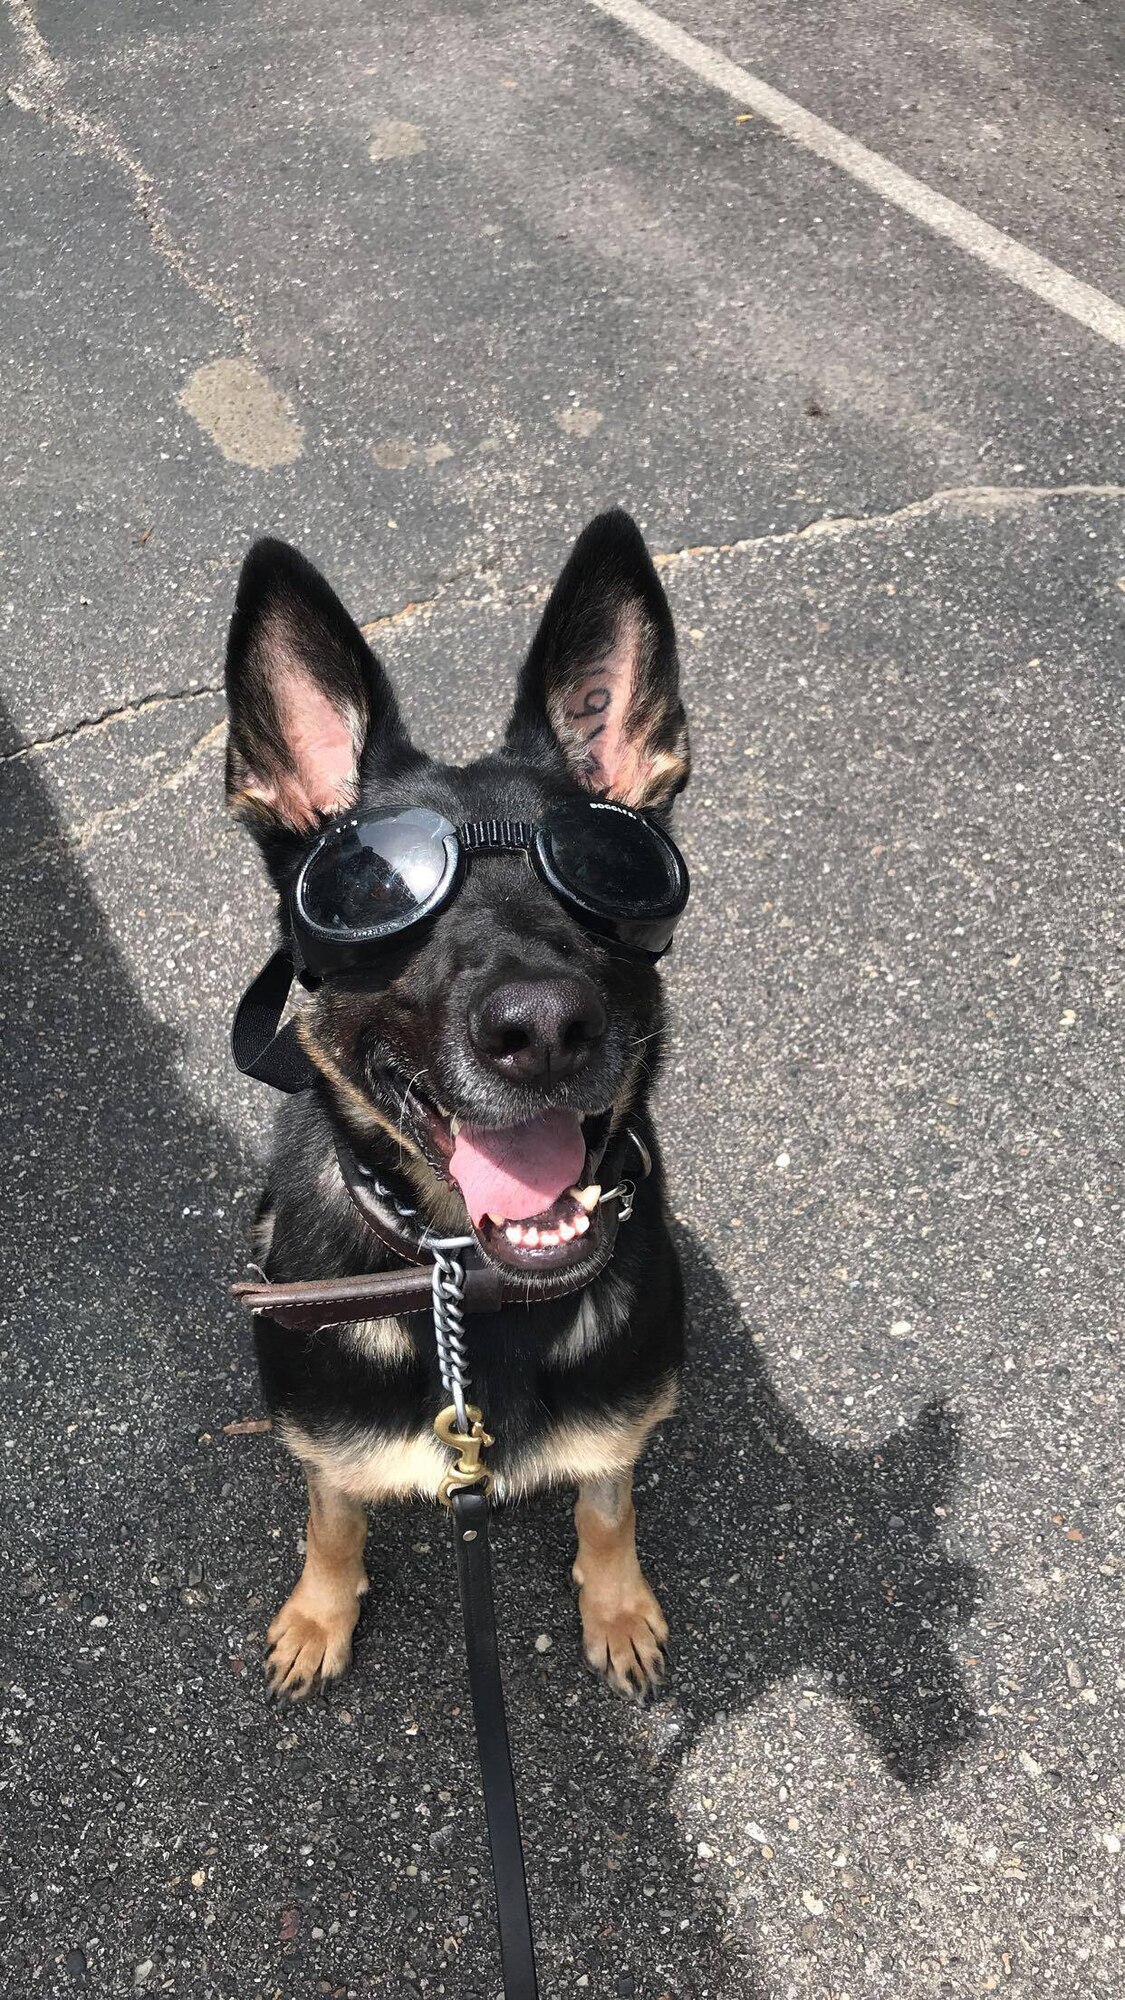 Cora, 97th Security Forces Squadron military working dog (MWD), poses for a photo with her “doggles” during a security detail, May 31, 2016. MWDs wear doggles to protect their eyes during dust storms or helicopter training. (Courtesy photo from Tech. Sgt. Andres Posada)